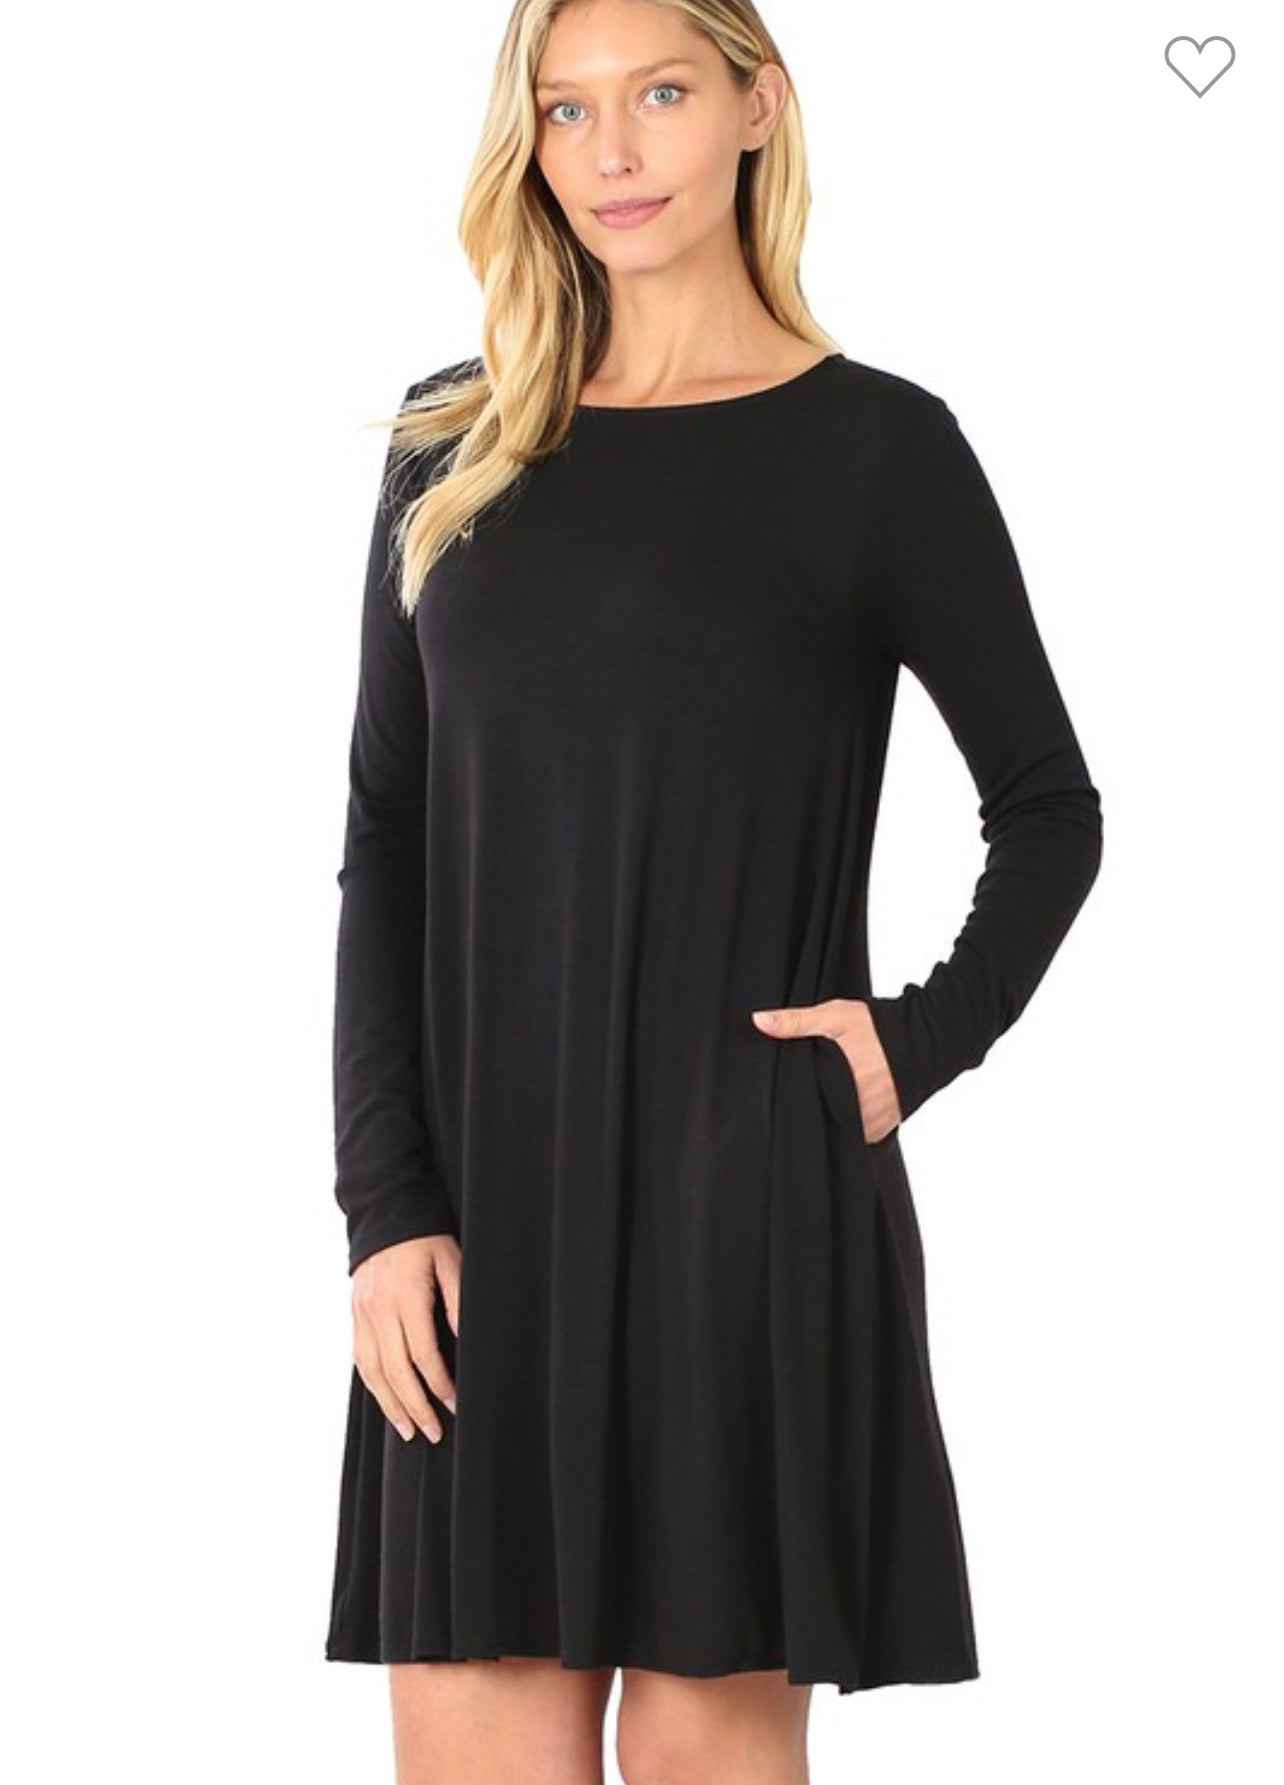 Long sleeve flare, dress with pockets, black/teal